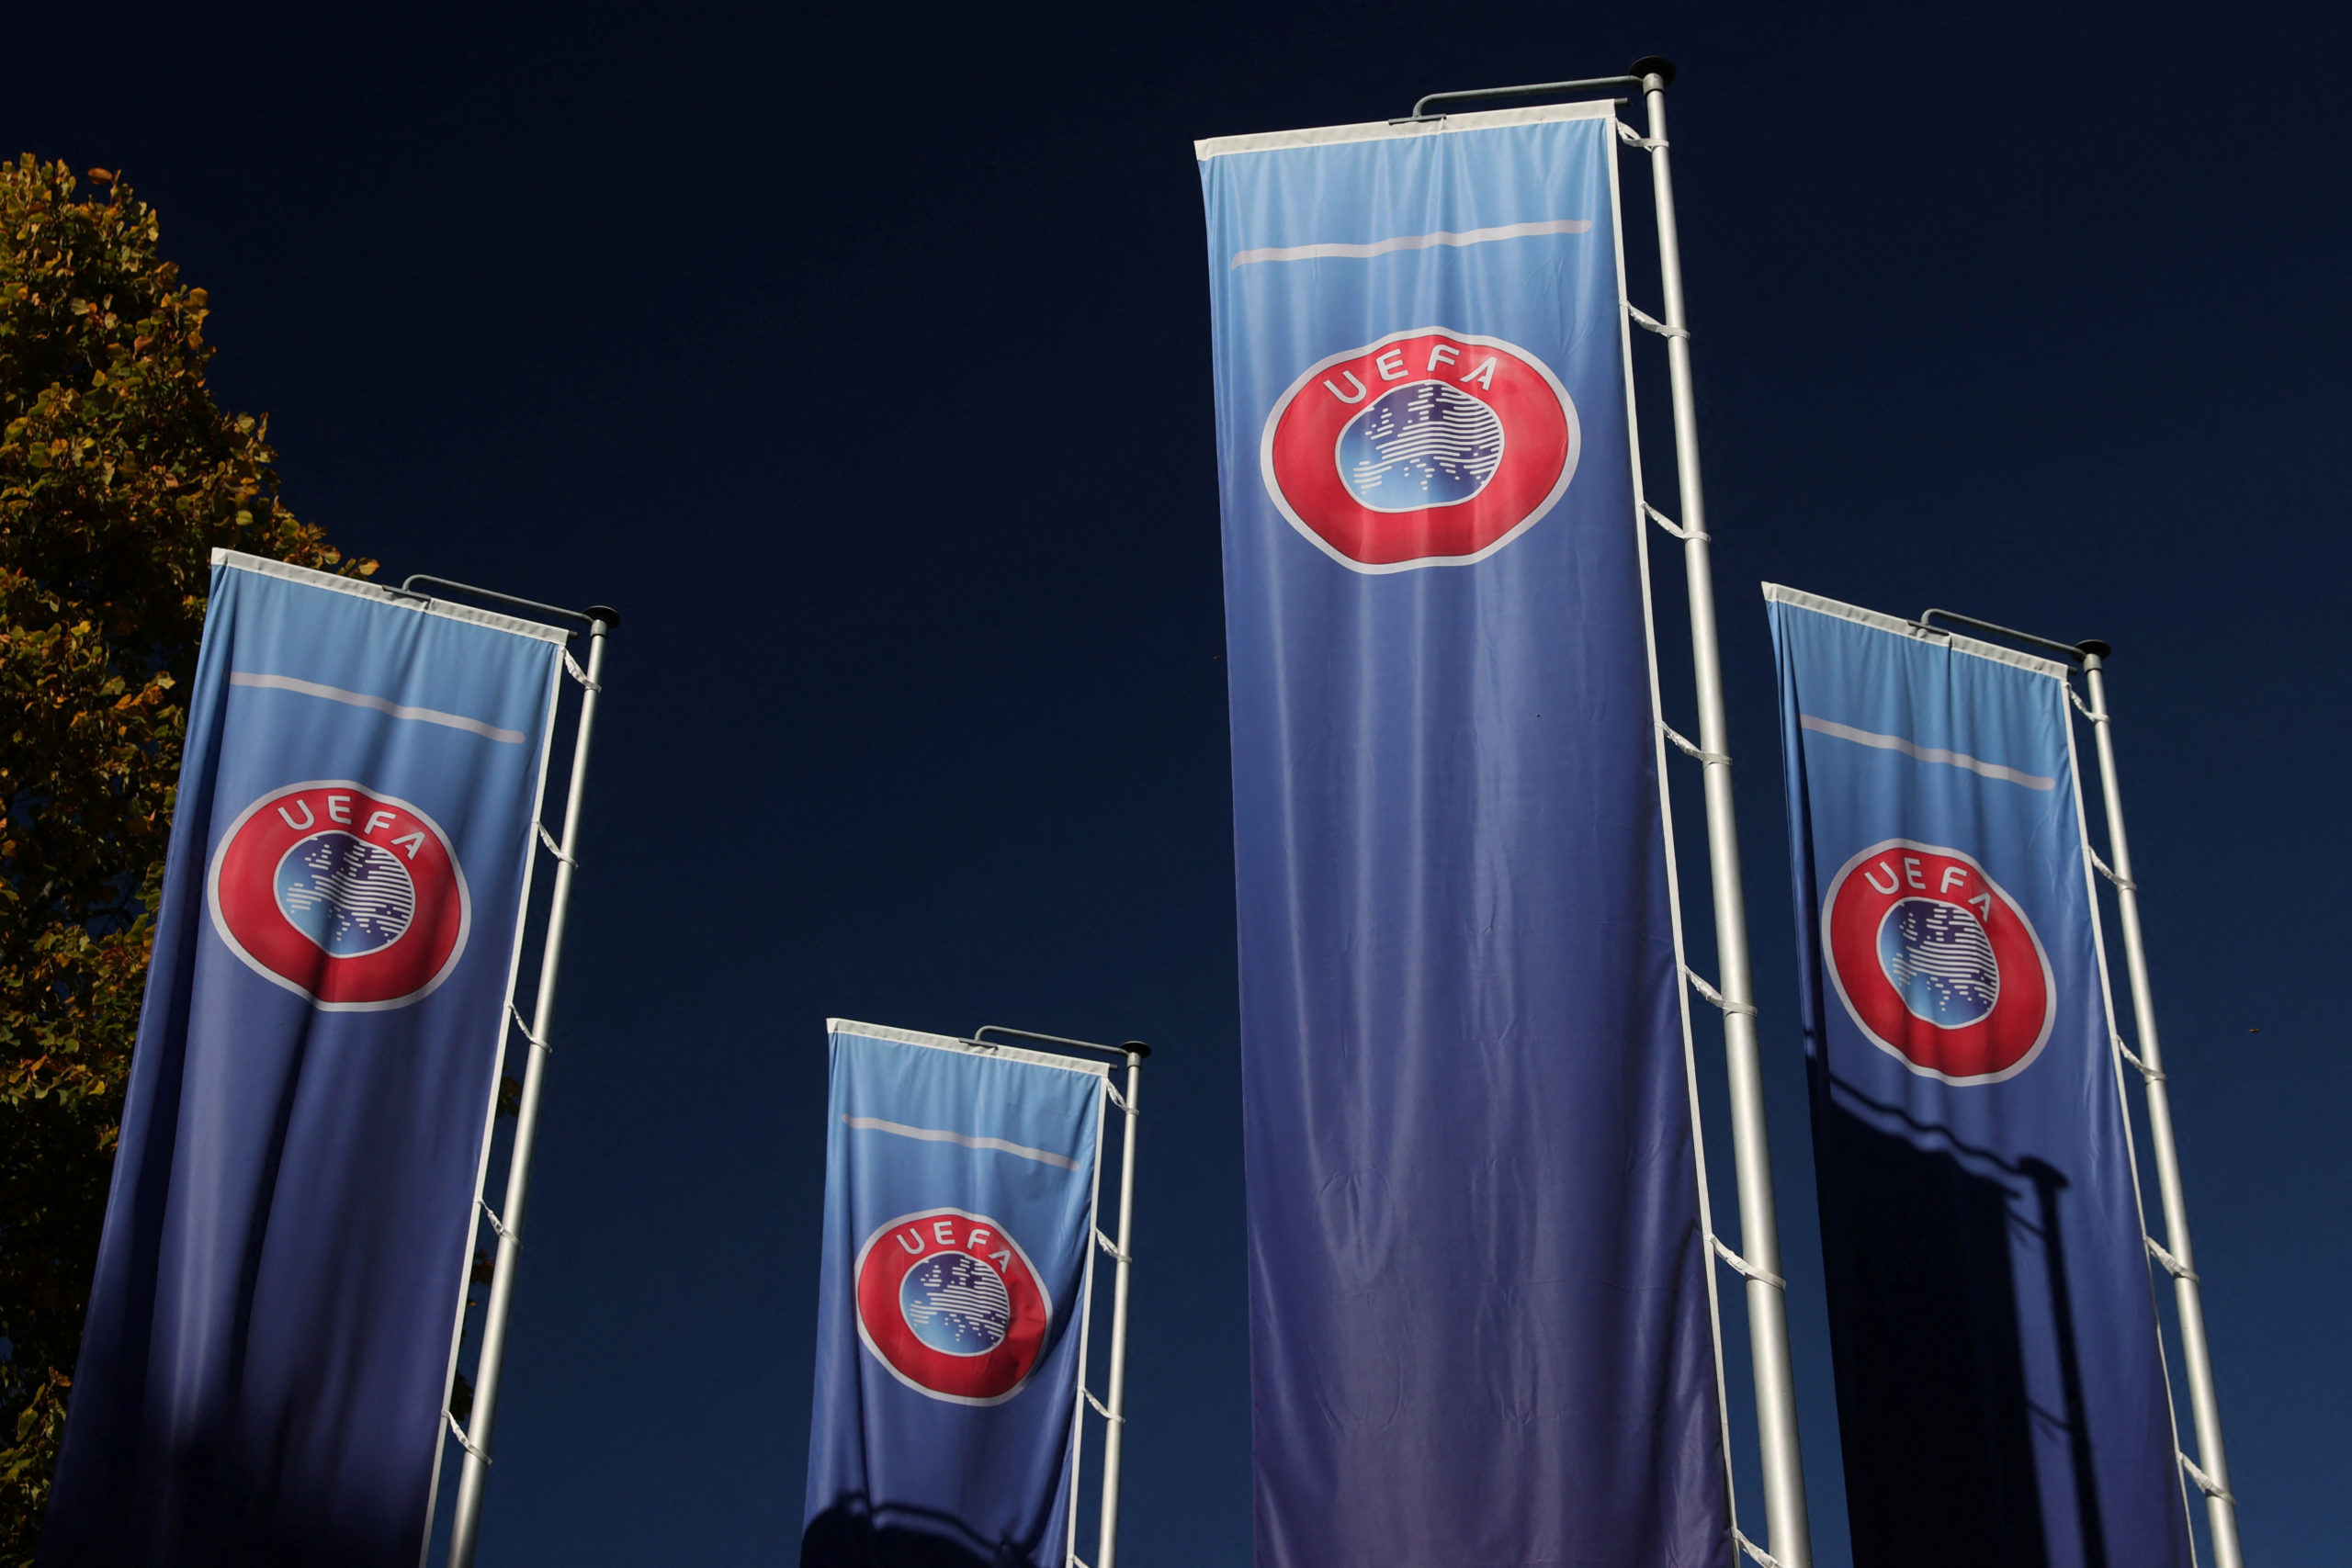 Flags with the UEFA logo are seen in Nyon